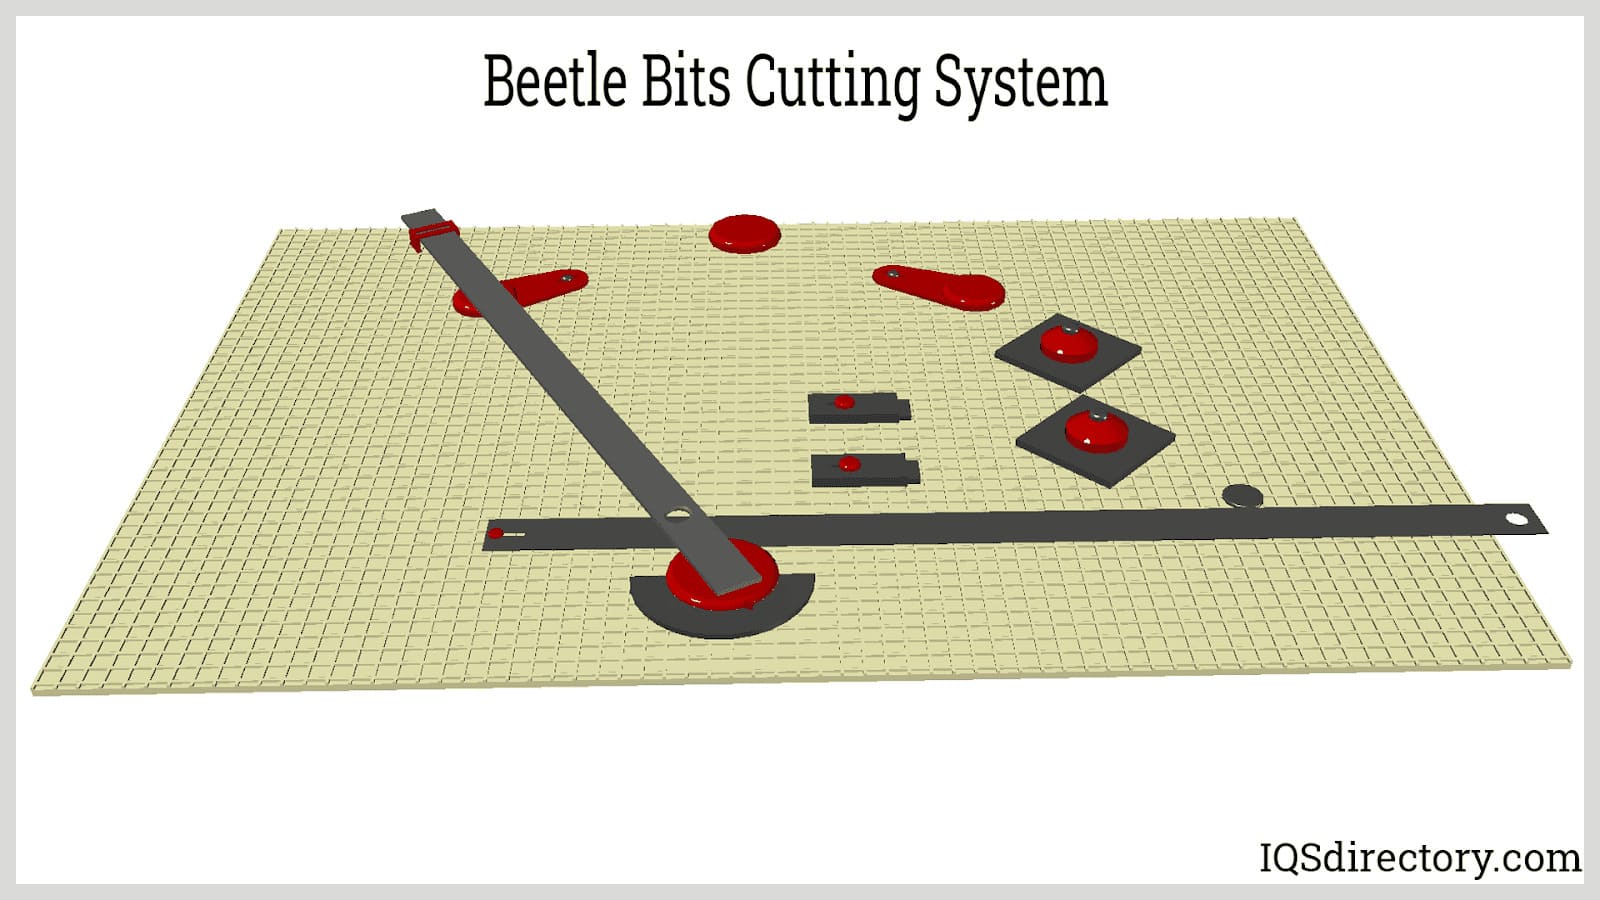 Beetle Bits Cutting System - Anything in Stained Glass